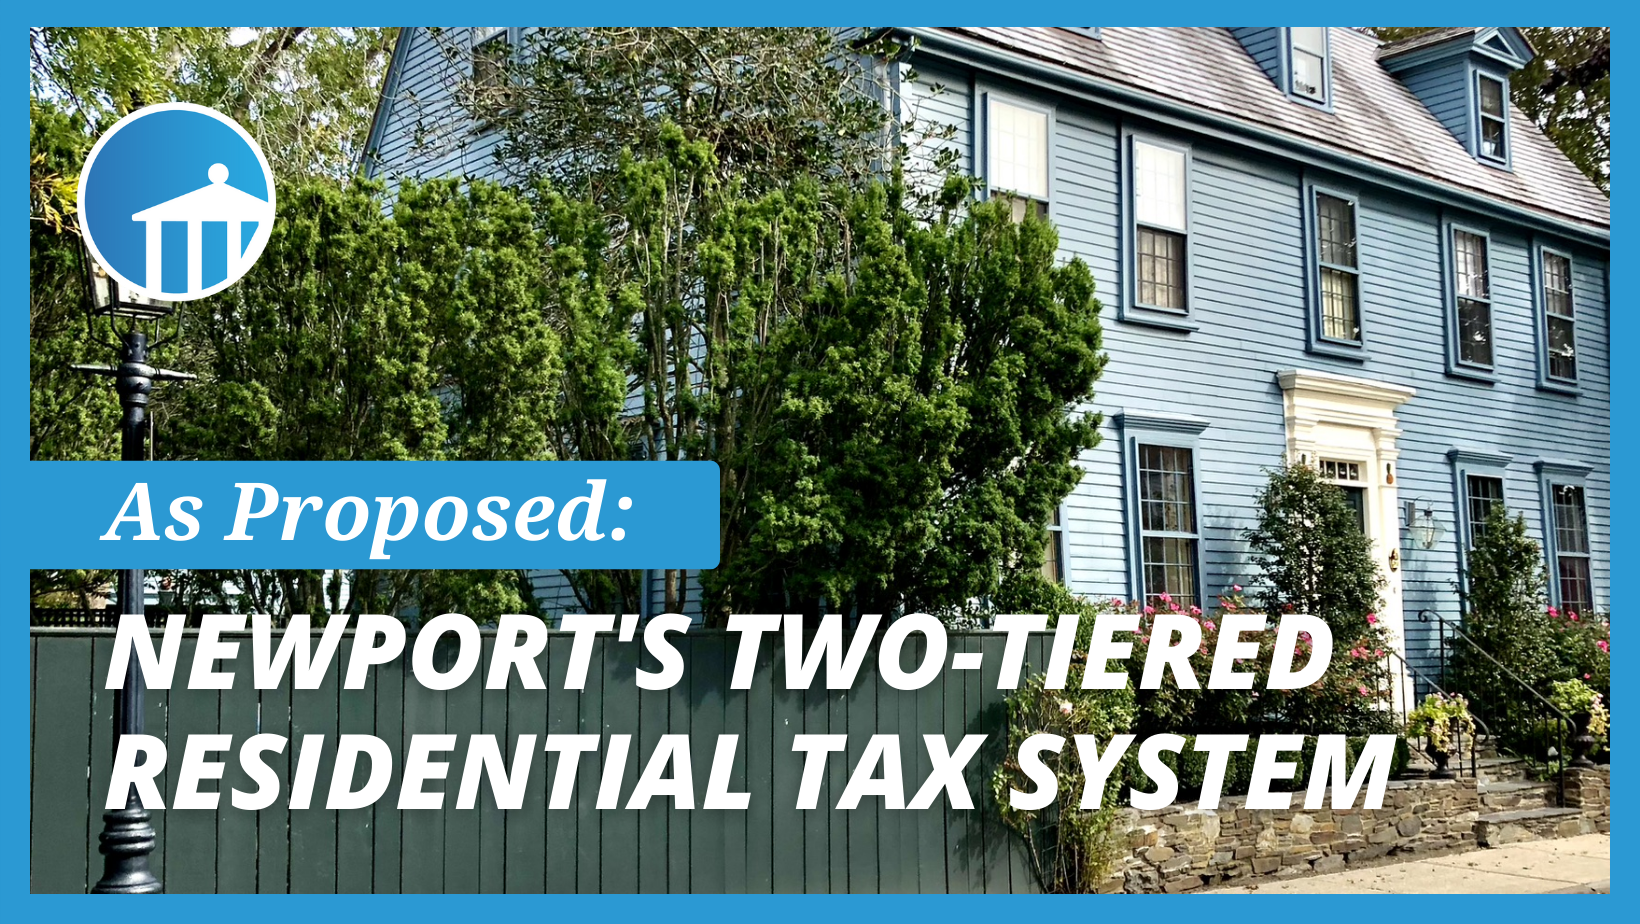 Understanding the City's Proposed 2-Tier Residential Tax Rate